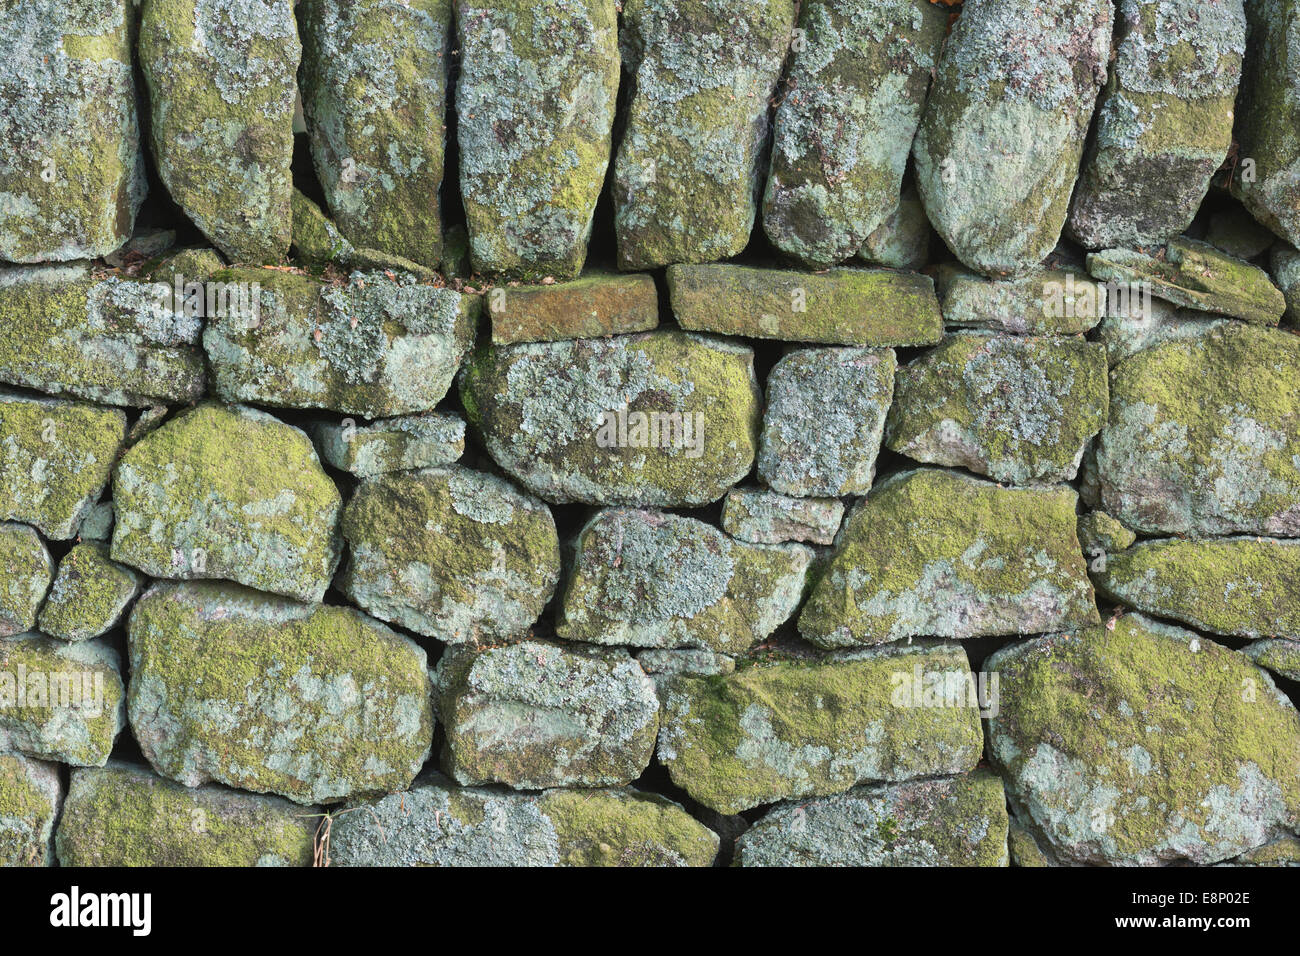 Dry stone wall made of gritstone and covered with lichens and algae.  Derbyshire, Peak District Stock Photo